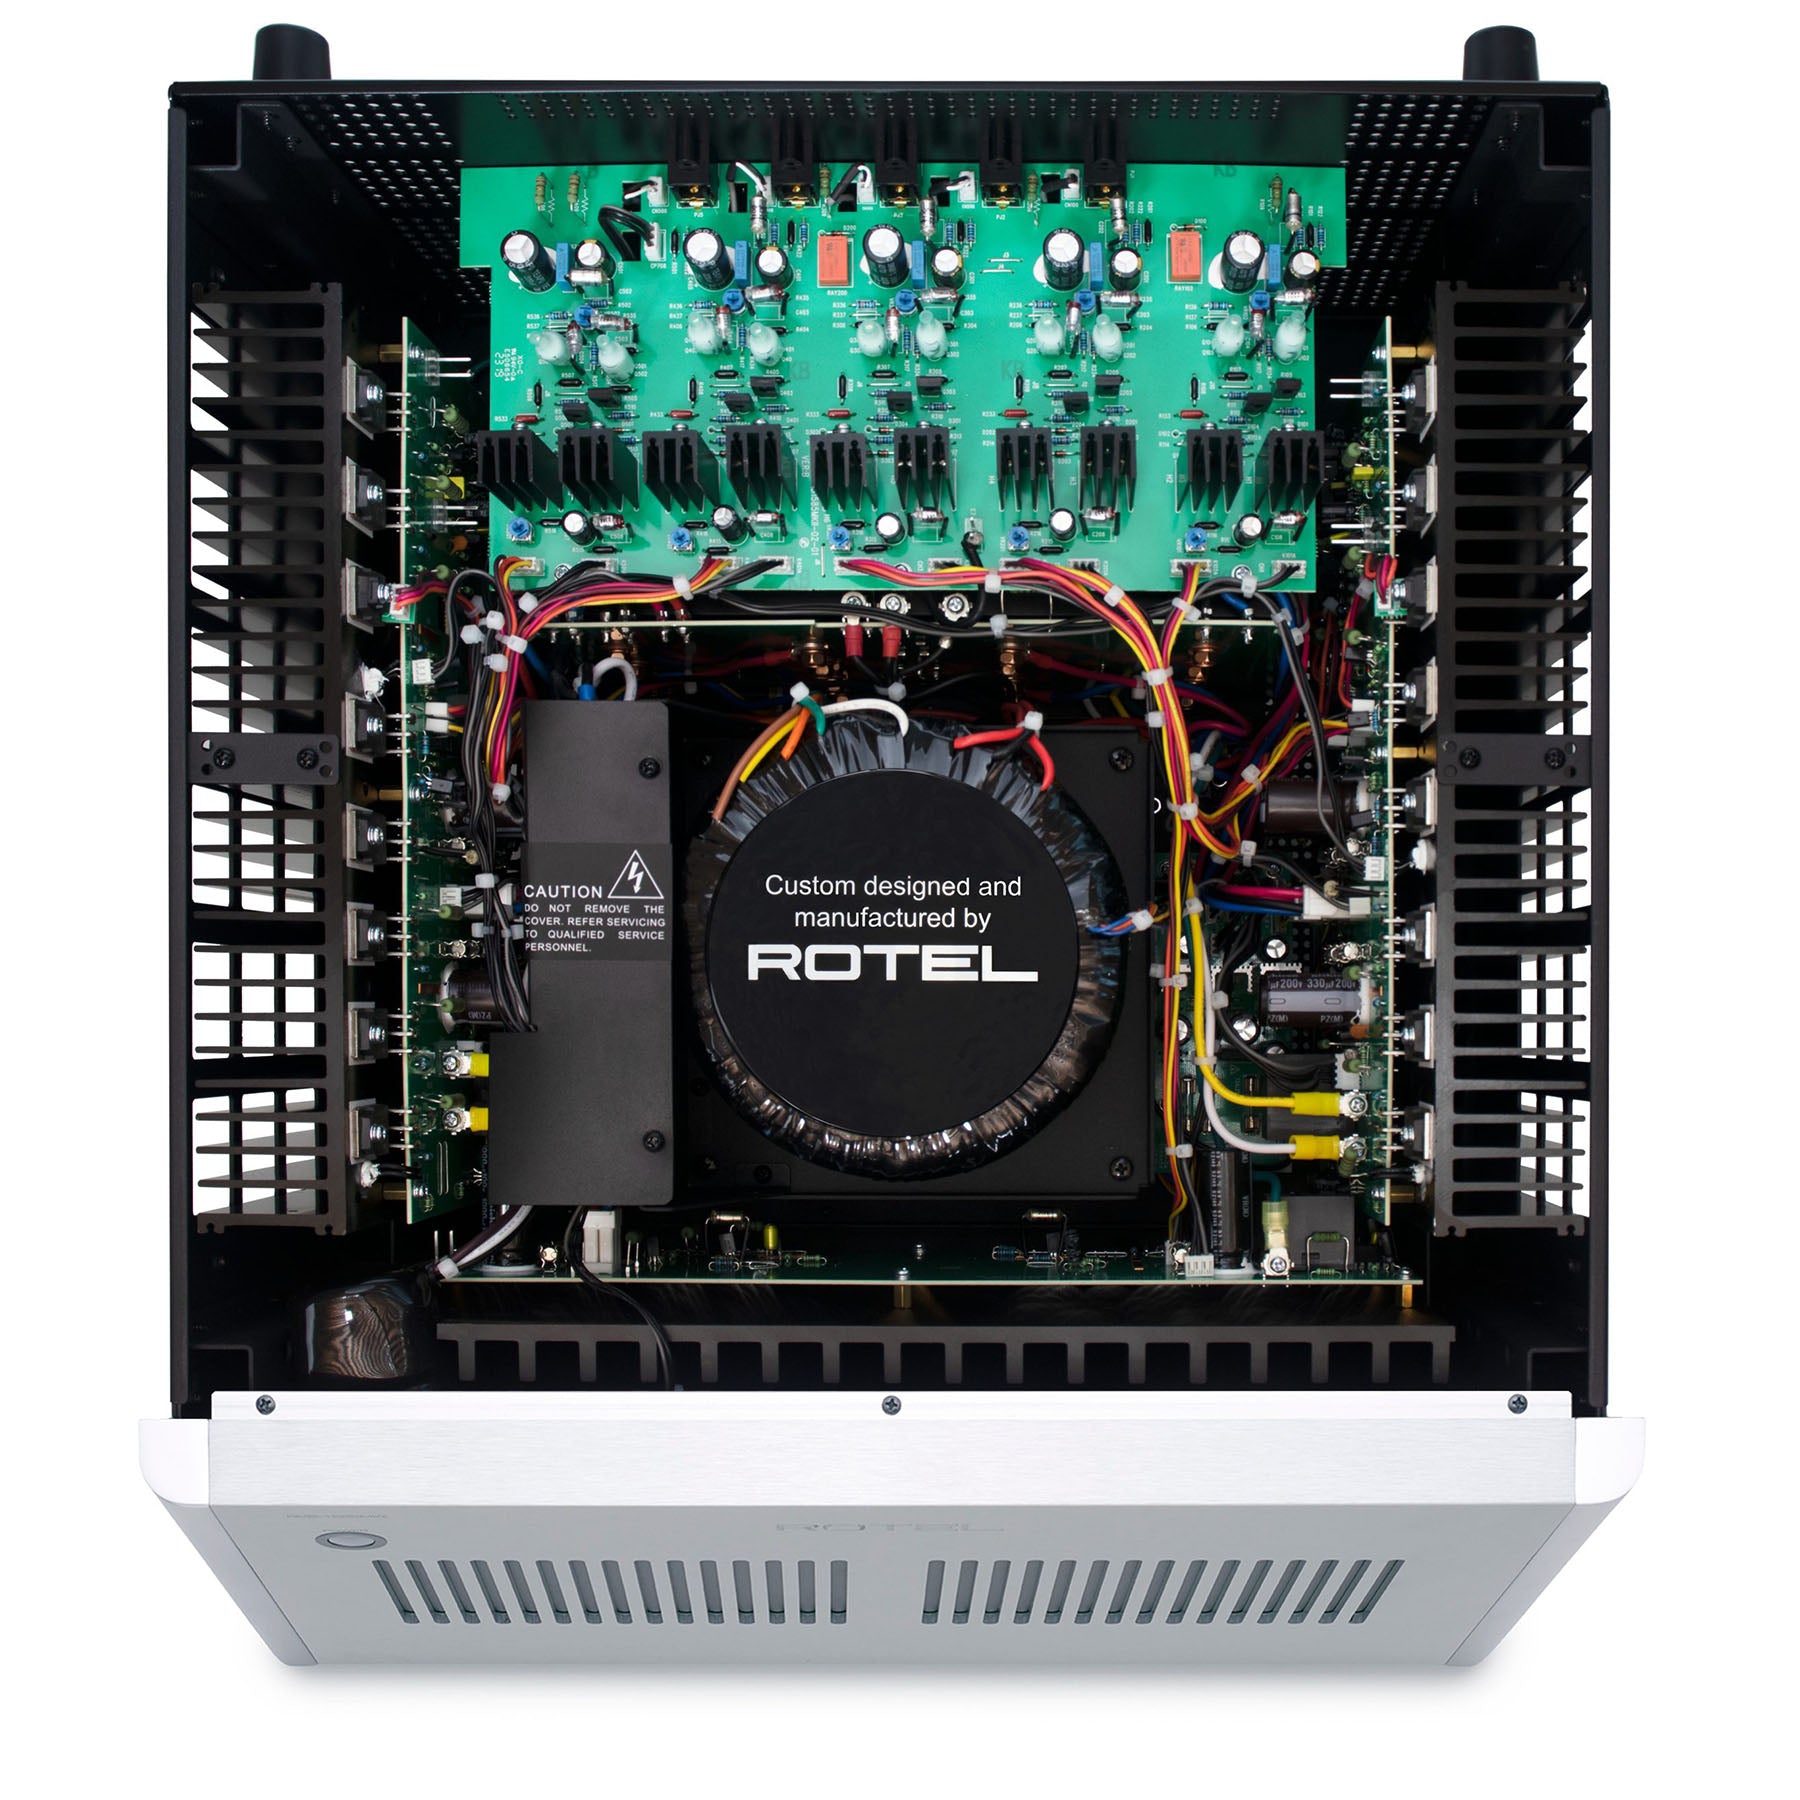 Rotel RMB-1585MKII Multi-channel Power Amplifier